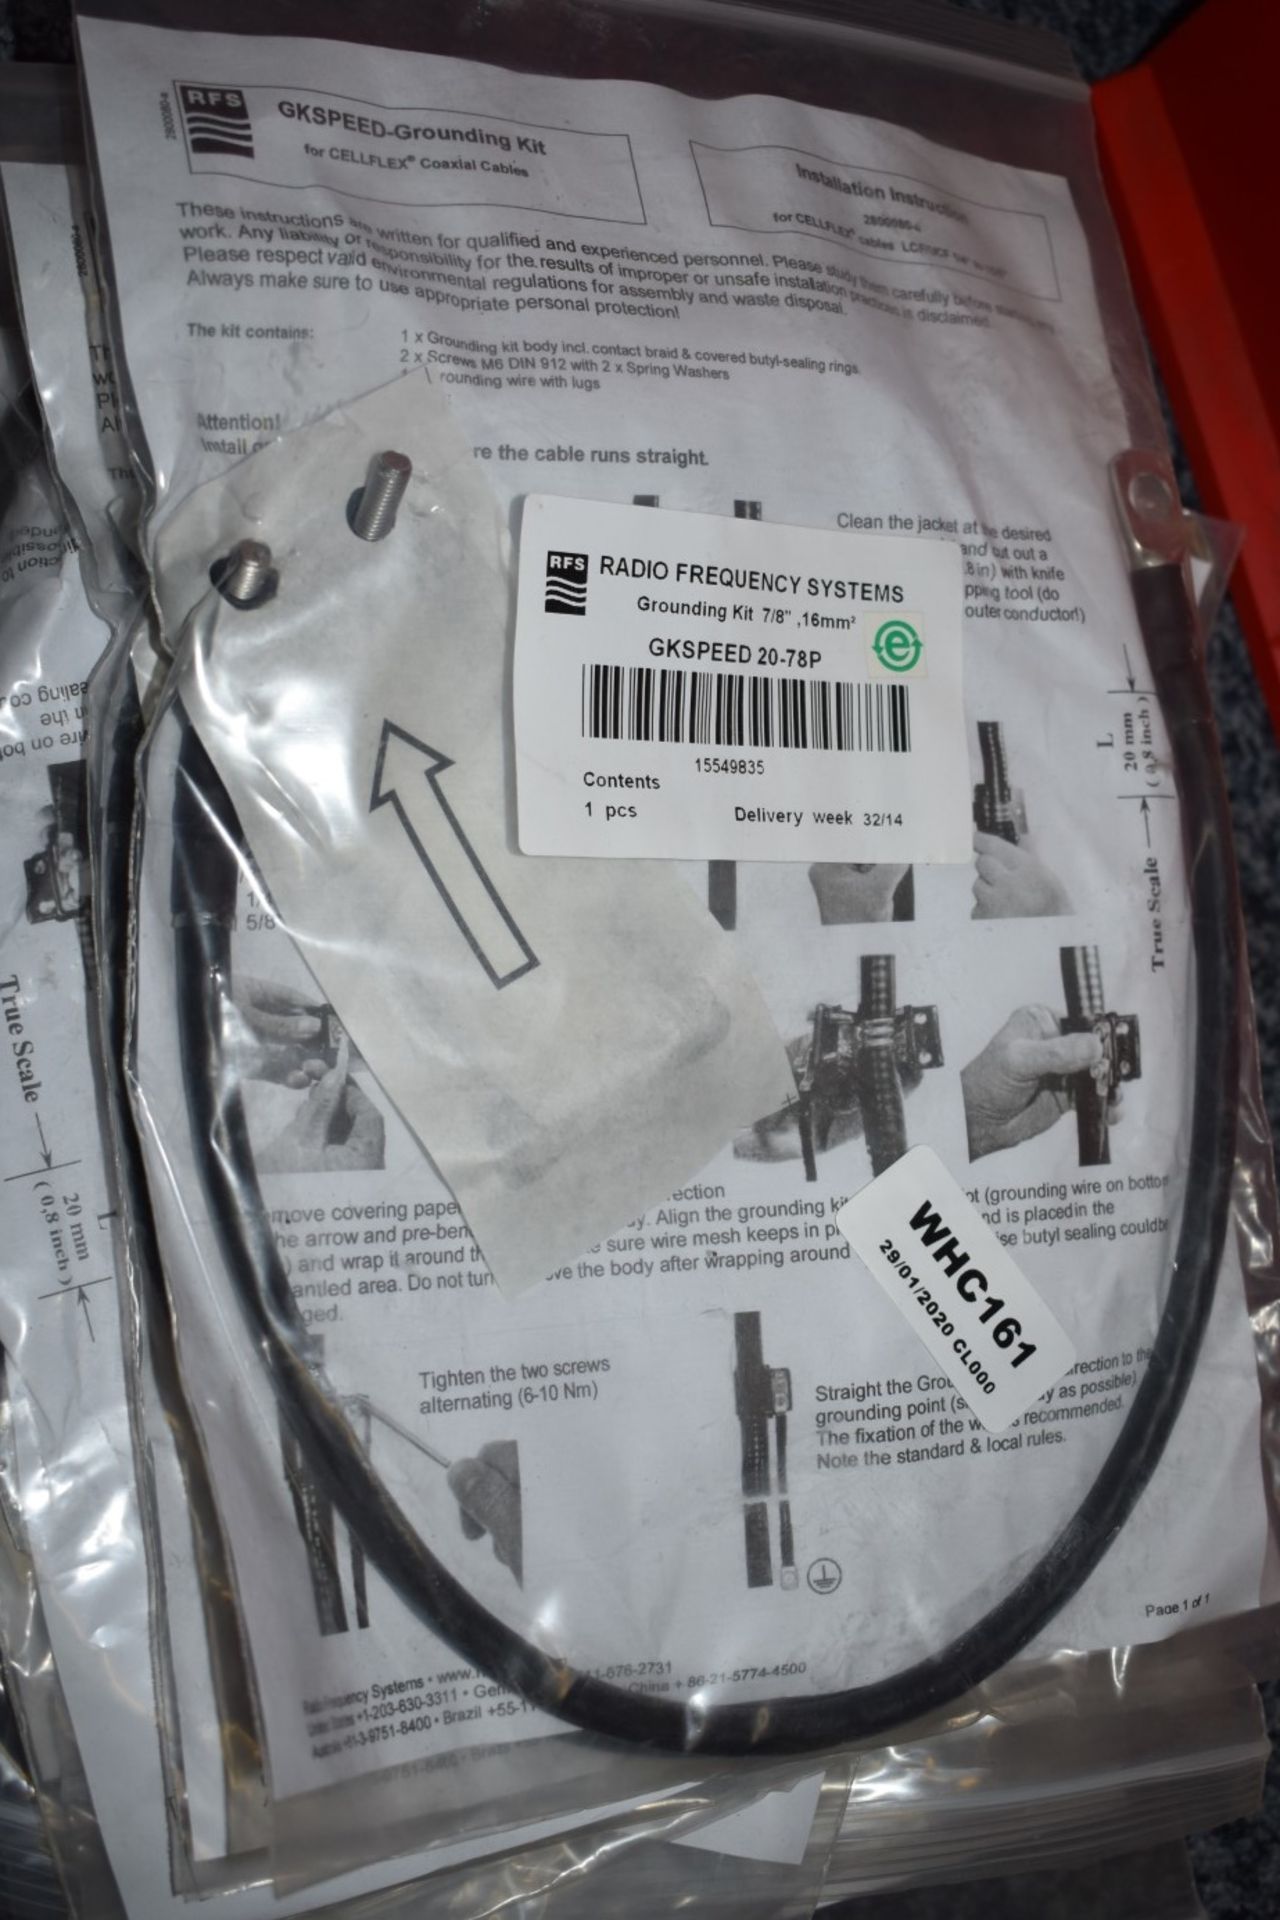 12 x Radio Frequency Systems Grounding Kits 7/8" 16mm - Brand New in Packets - Ref WHC161 WH2 - - Image 2 of 3